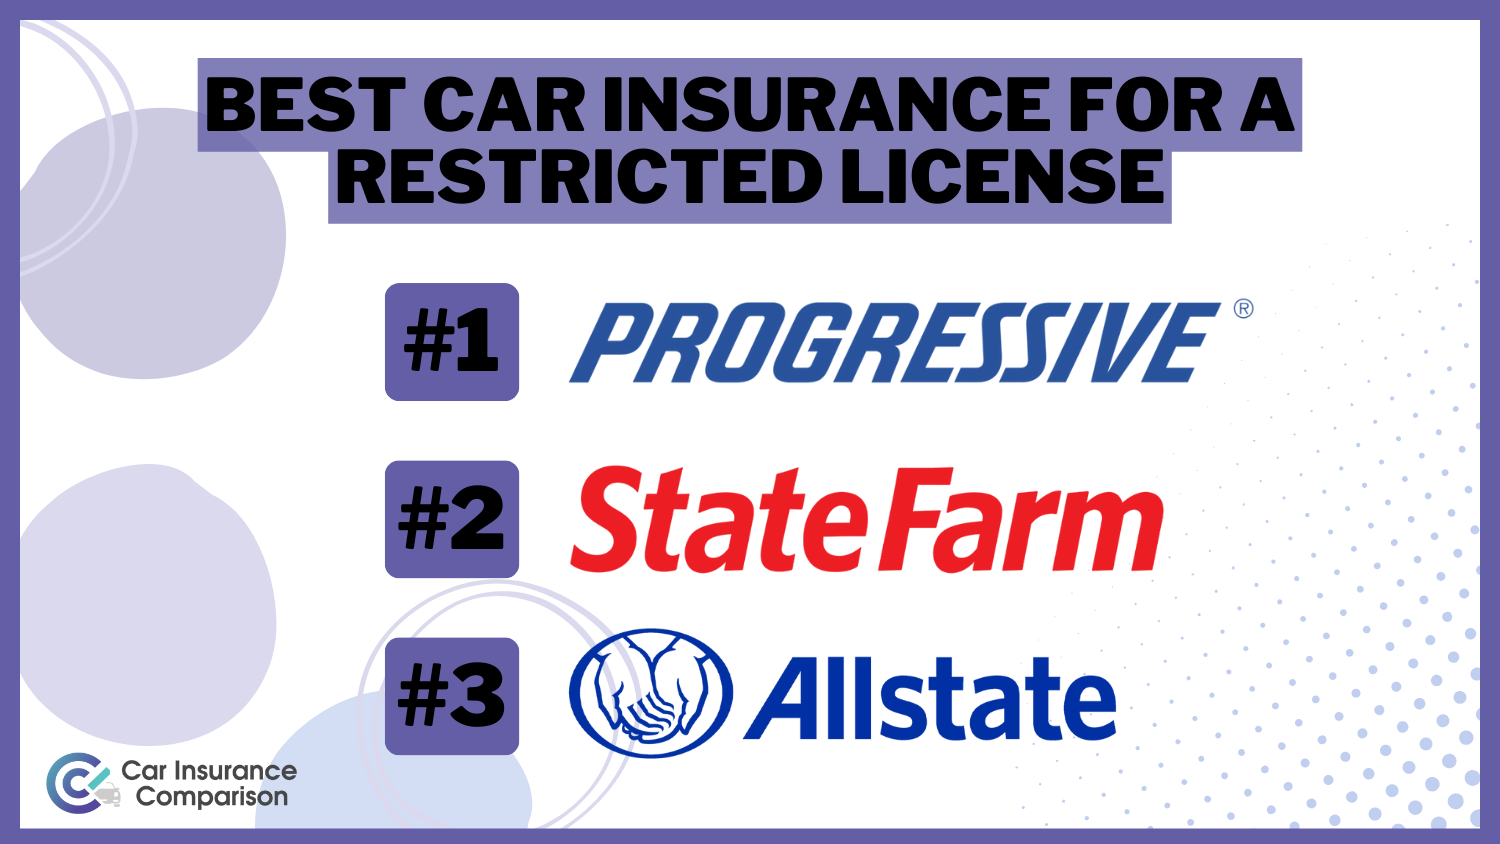 Progressive, State Farm, and Allstate: Best Car Insurance for a Restricted License